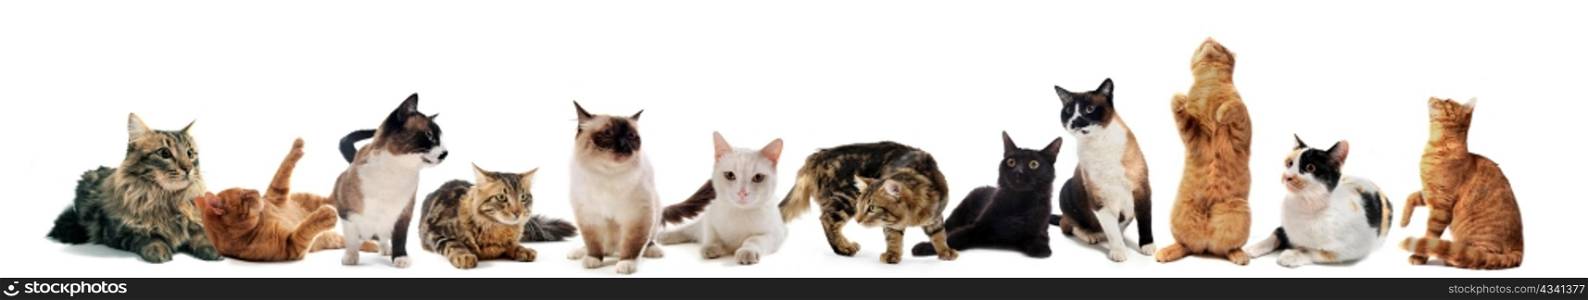 cats and kitten on a white background